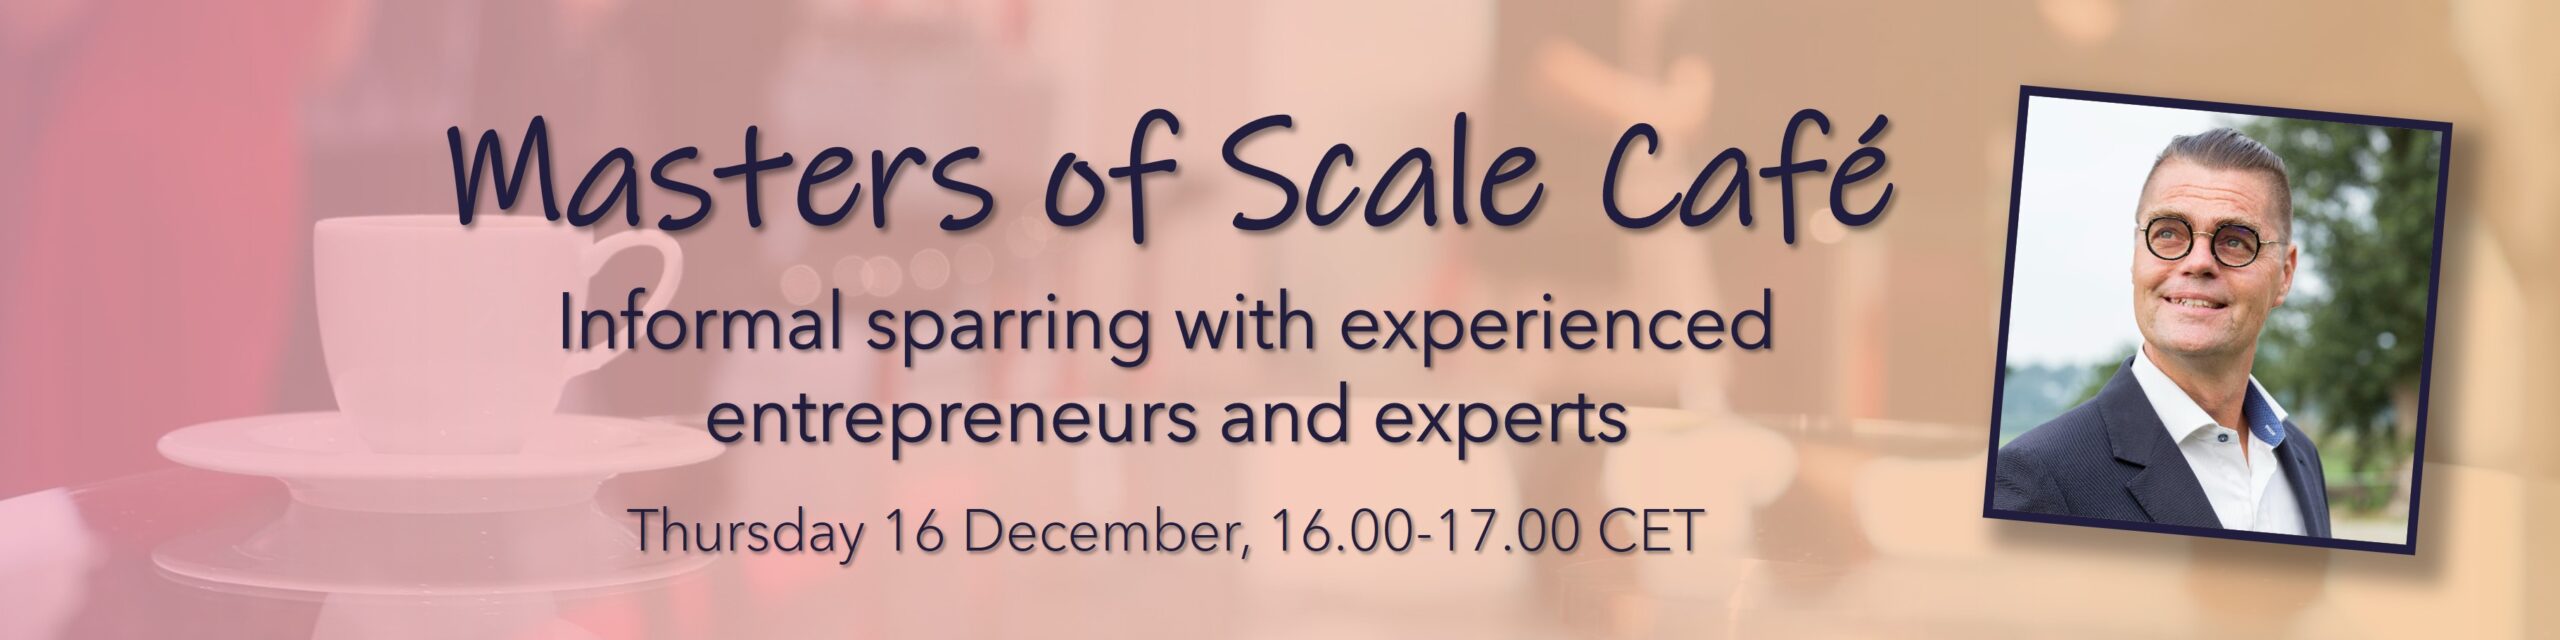 Masters of Scale Café with Pieter Jan Doets